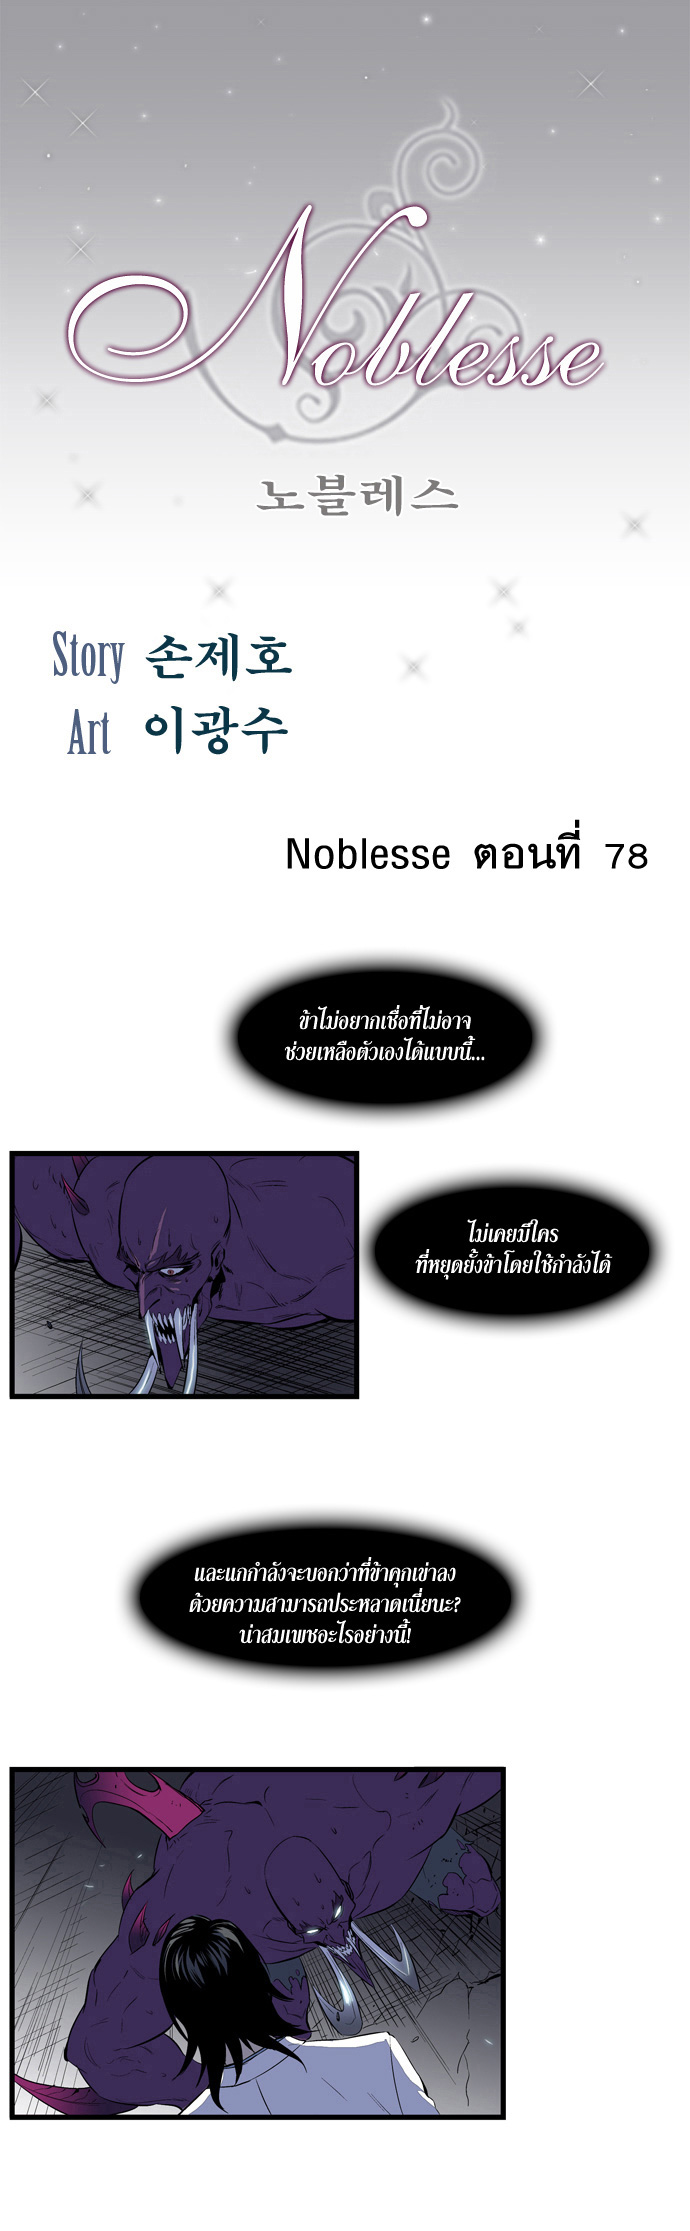 Noblesse 78 002